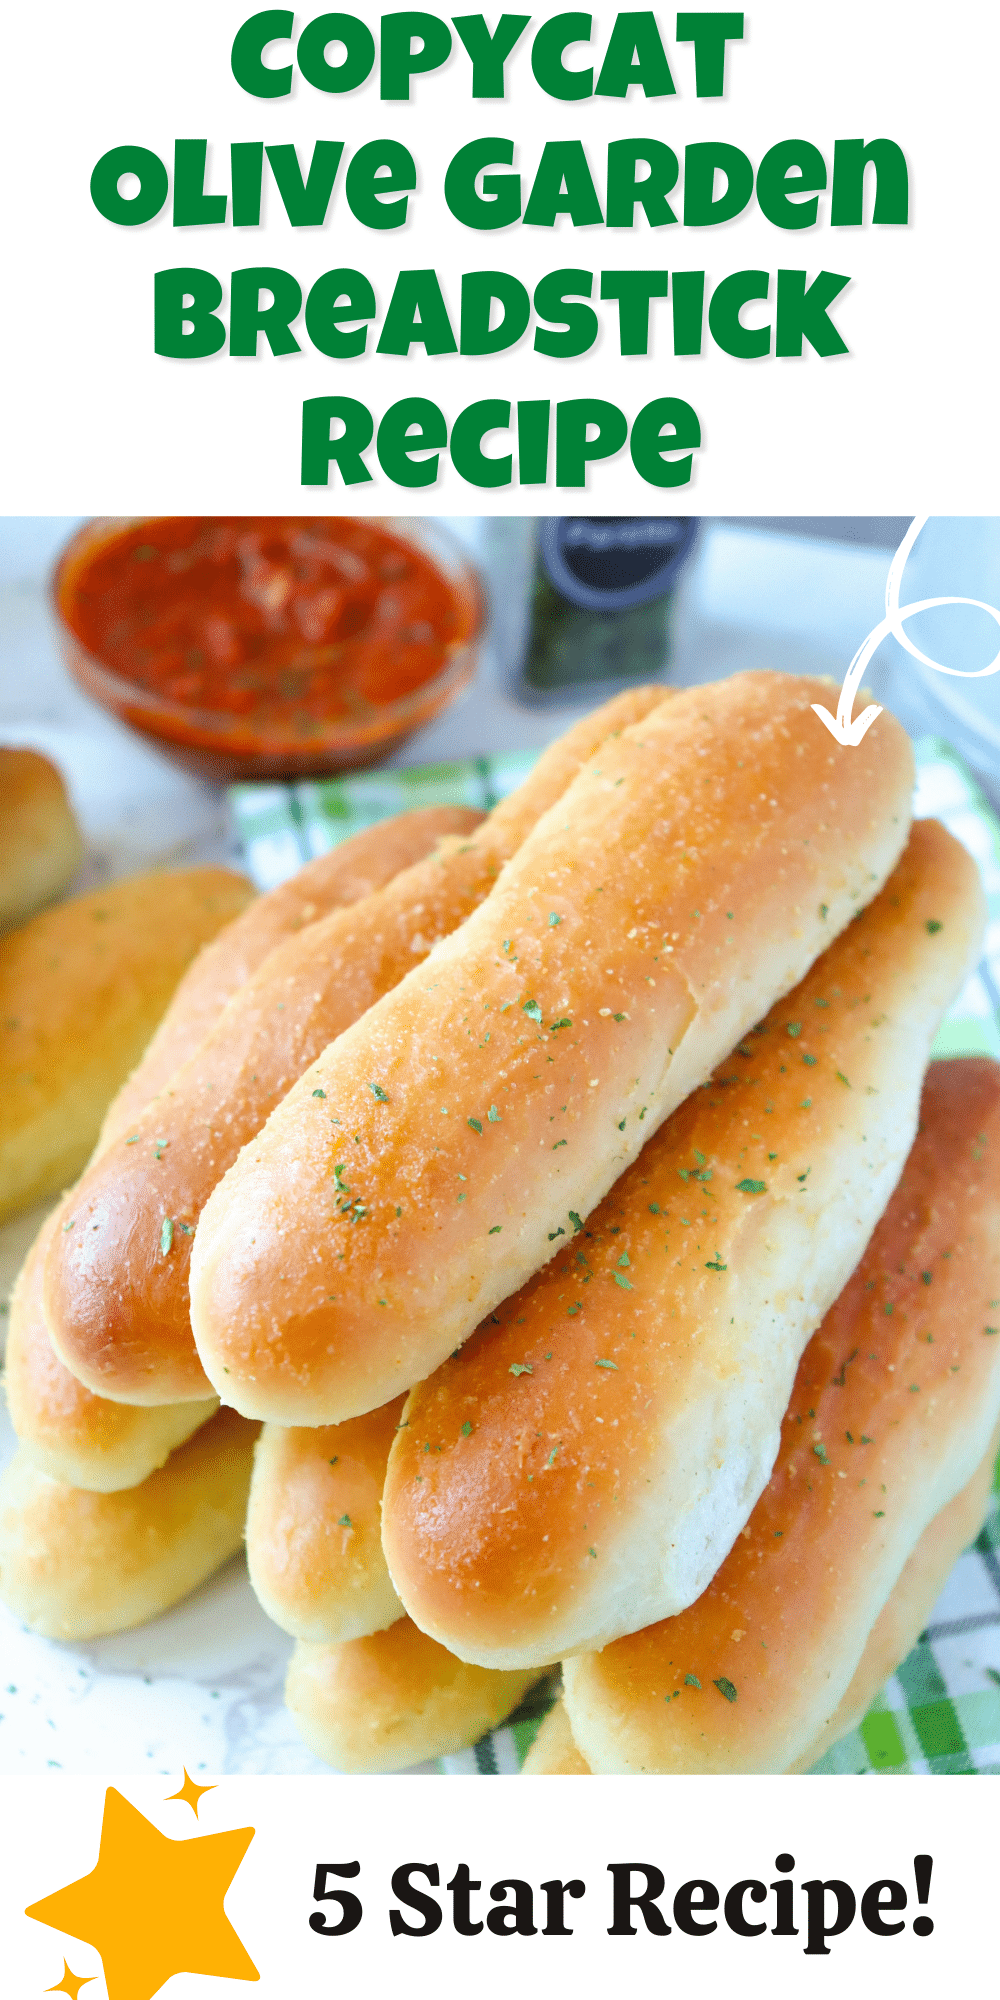 These homemade breadsticks are light and fluffy and lightly browned, perfect as a side to any soup or pasta dish. These breadsticks are our favorite Copycat Olive Garden Breadsticks recipe! via @bigbearswife